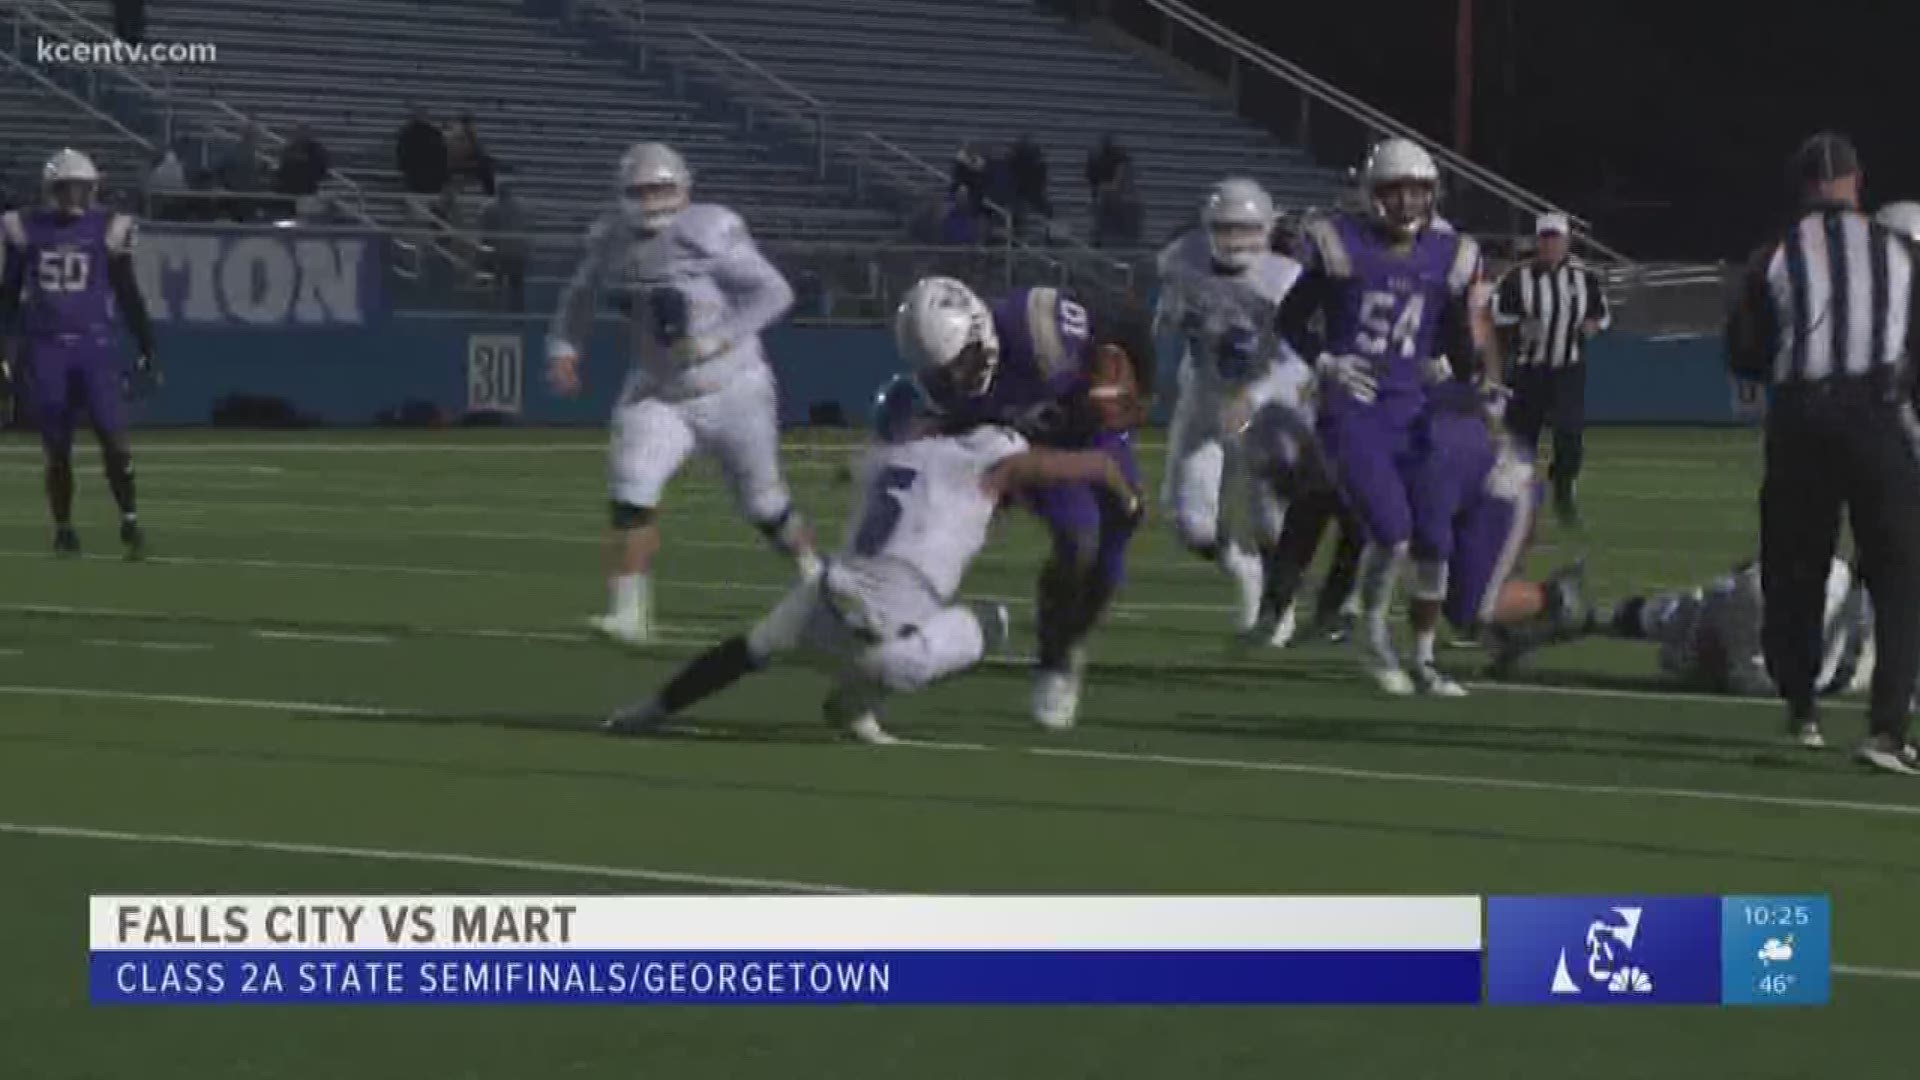 Prior to this game, Mart outscored its playoff opponents 67-7. Head coach Kevin Hoffman is excited to play at AT&T stadium for another state title.